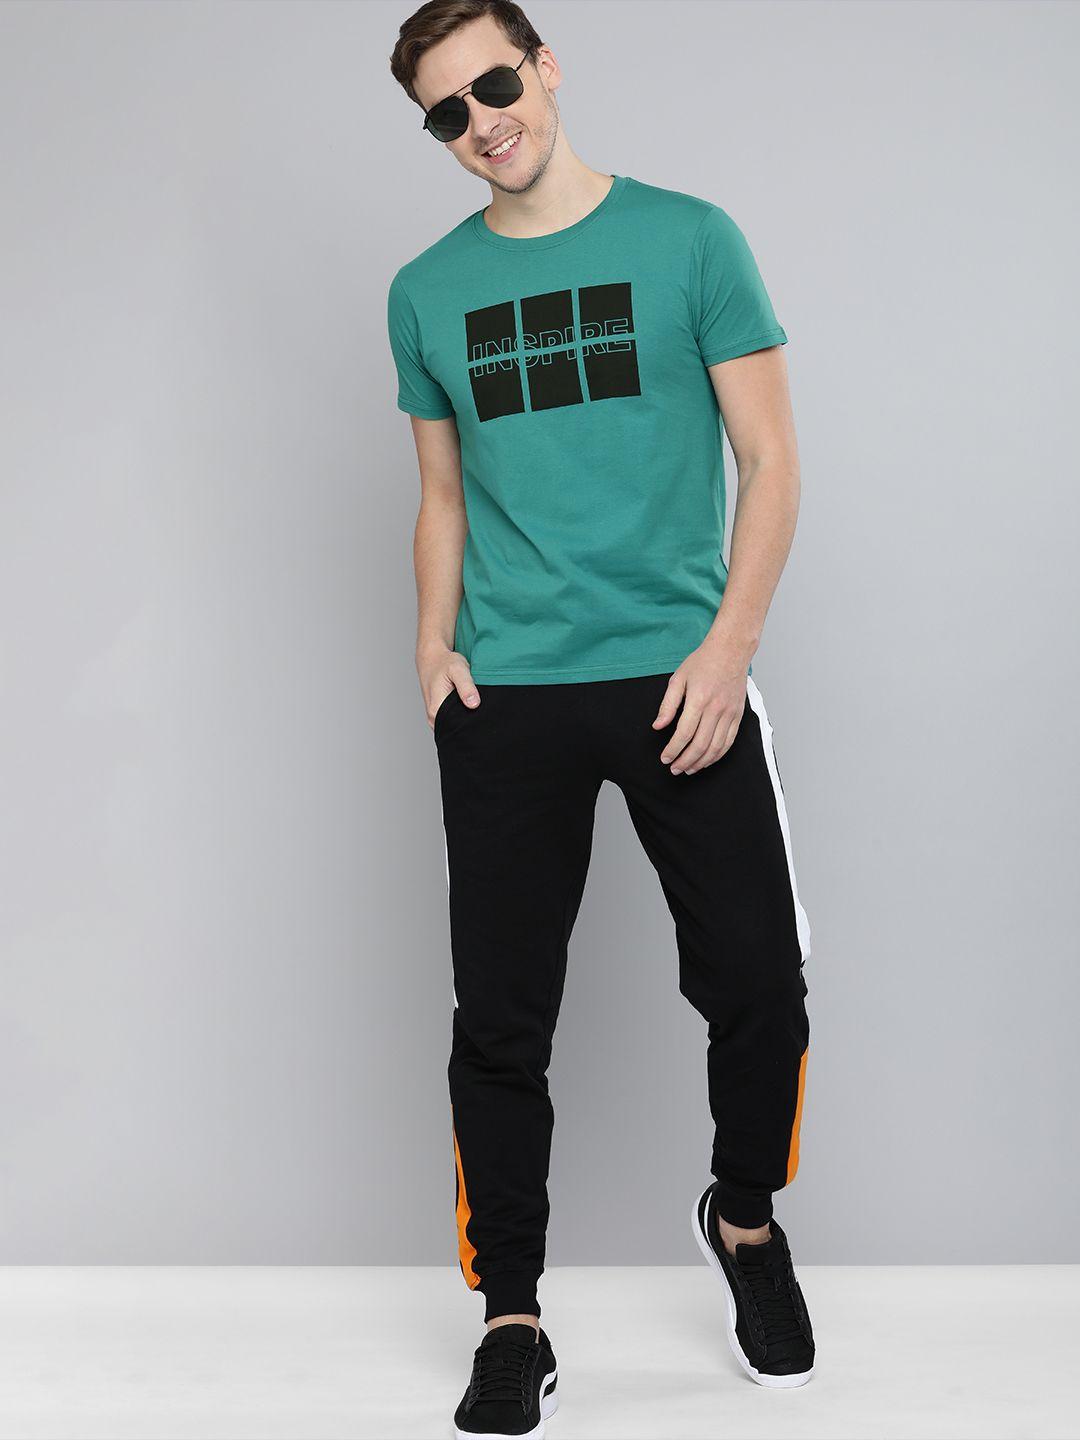 here&now men teal green typography printed pure cotton t-shirt